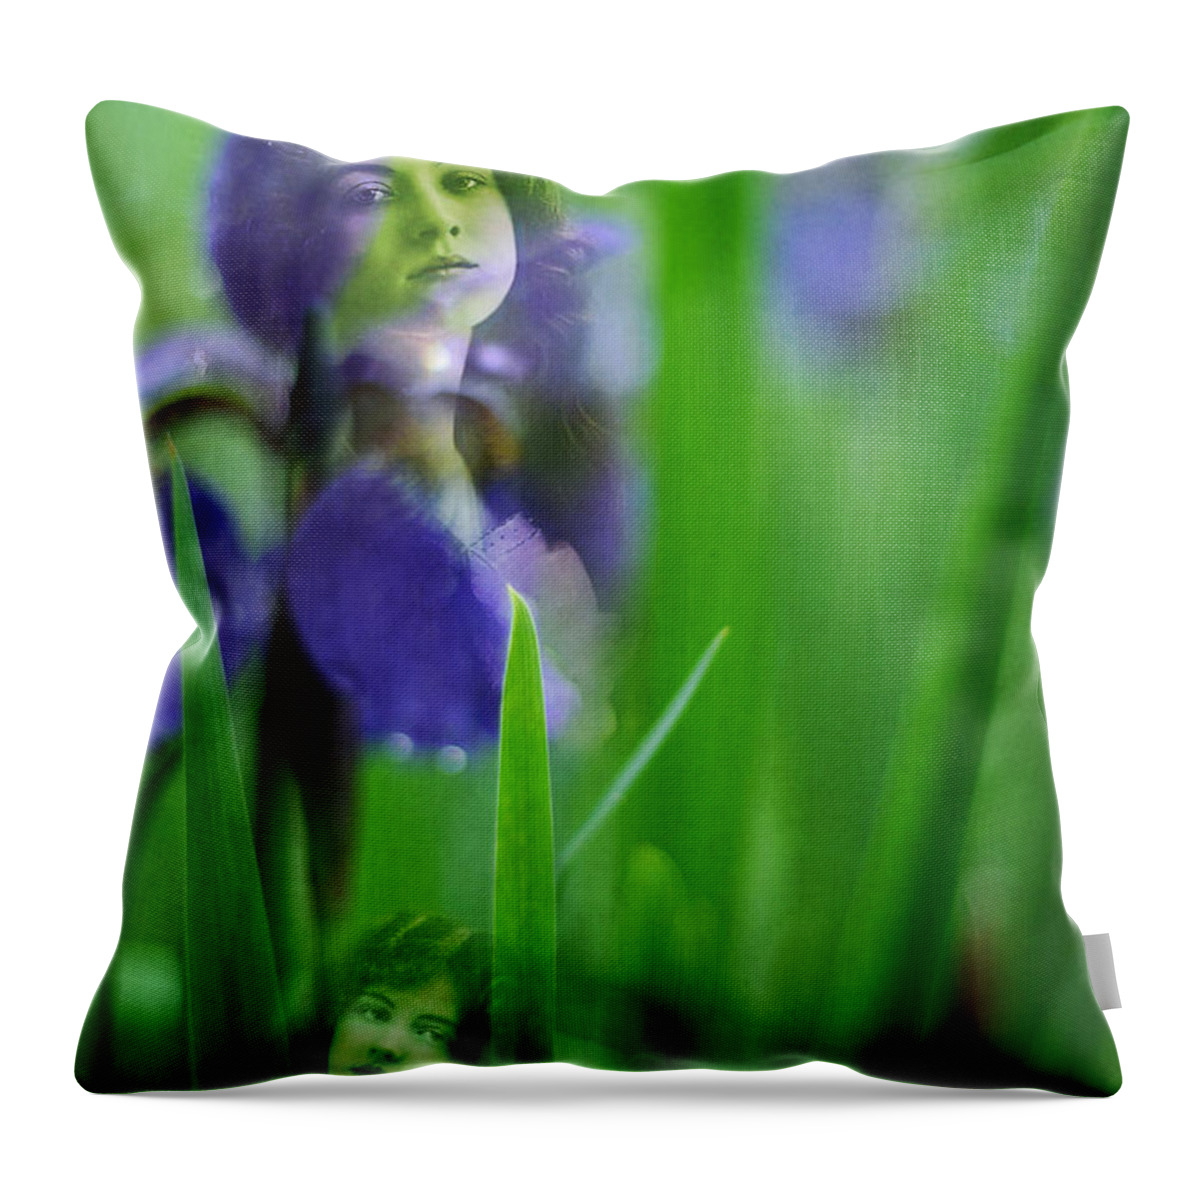 Portrait Throw Pillow featuring the photograph She Sees Herself by Rebecca Sherman